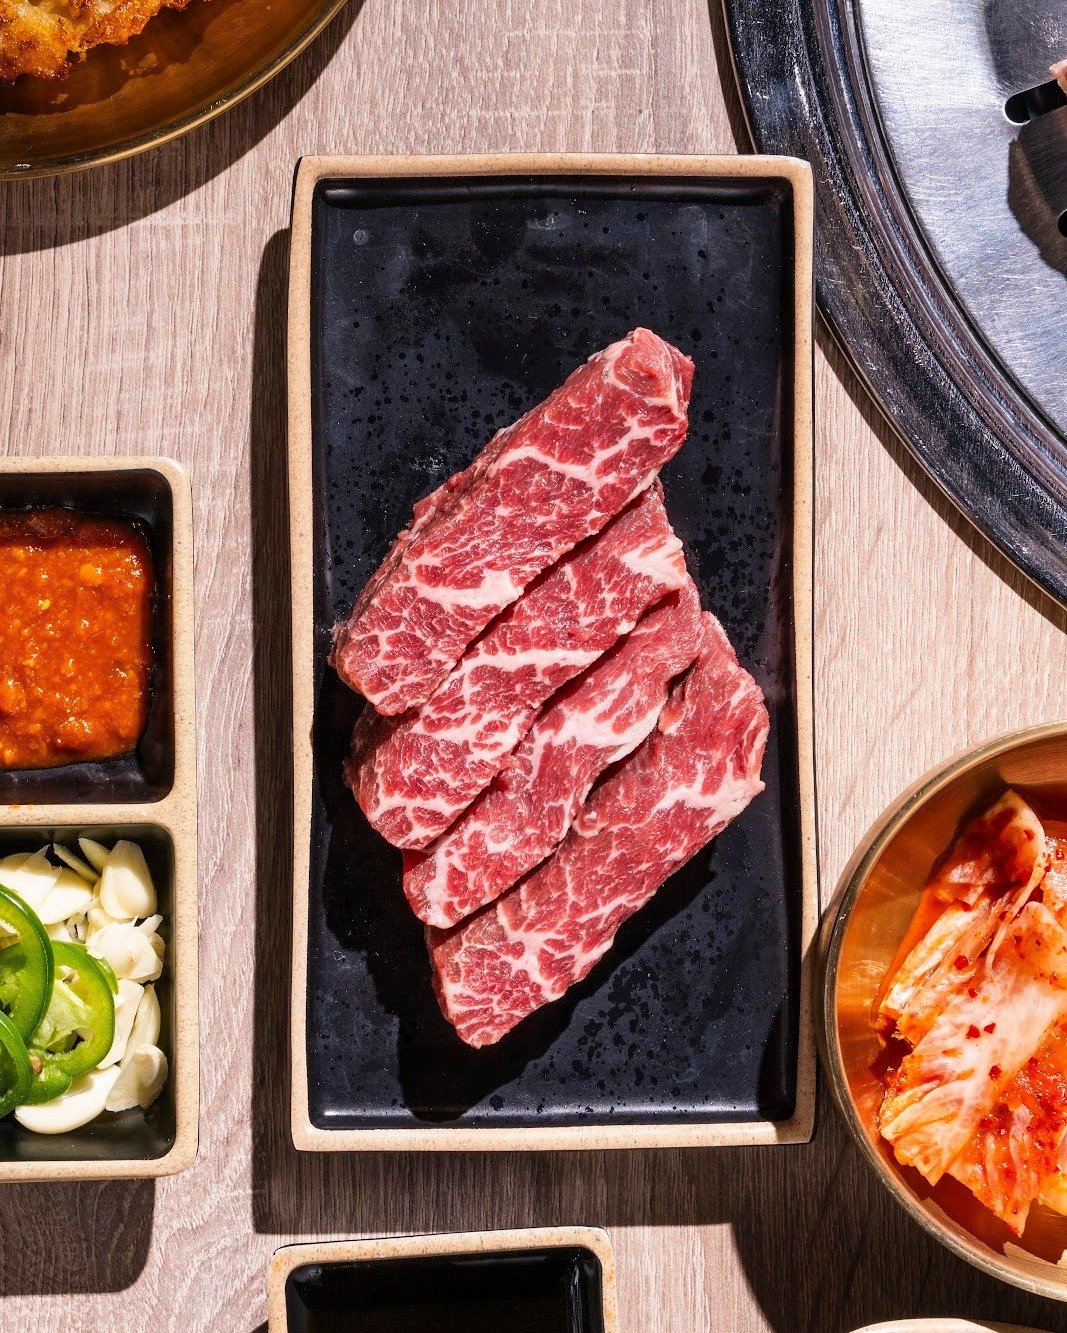 BRB drooling. 🤤 Who else has a favorite cut that they absolutely devour once it leaves the grill? ✋ 

#88qkbbq #meat #meatlover #banchan #asmrgrilling #grillandchill #kbbqislife #koreanbbq